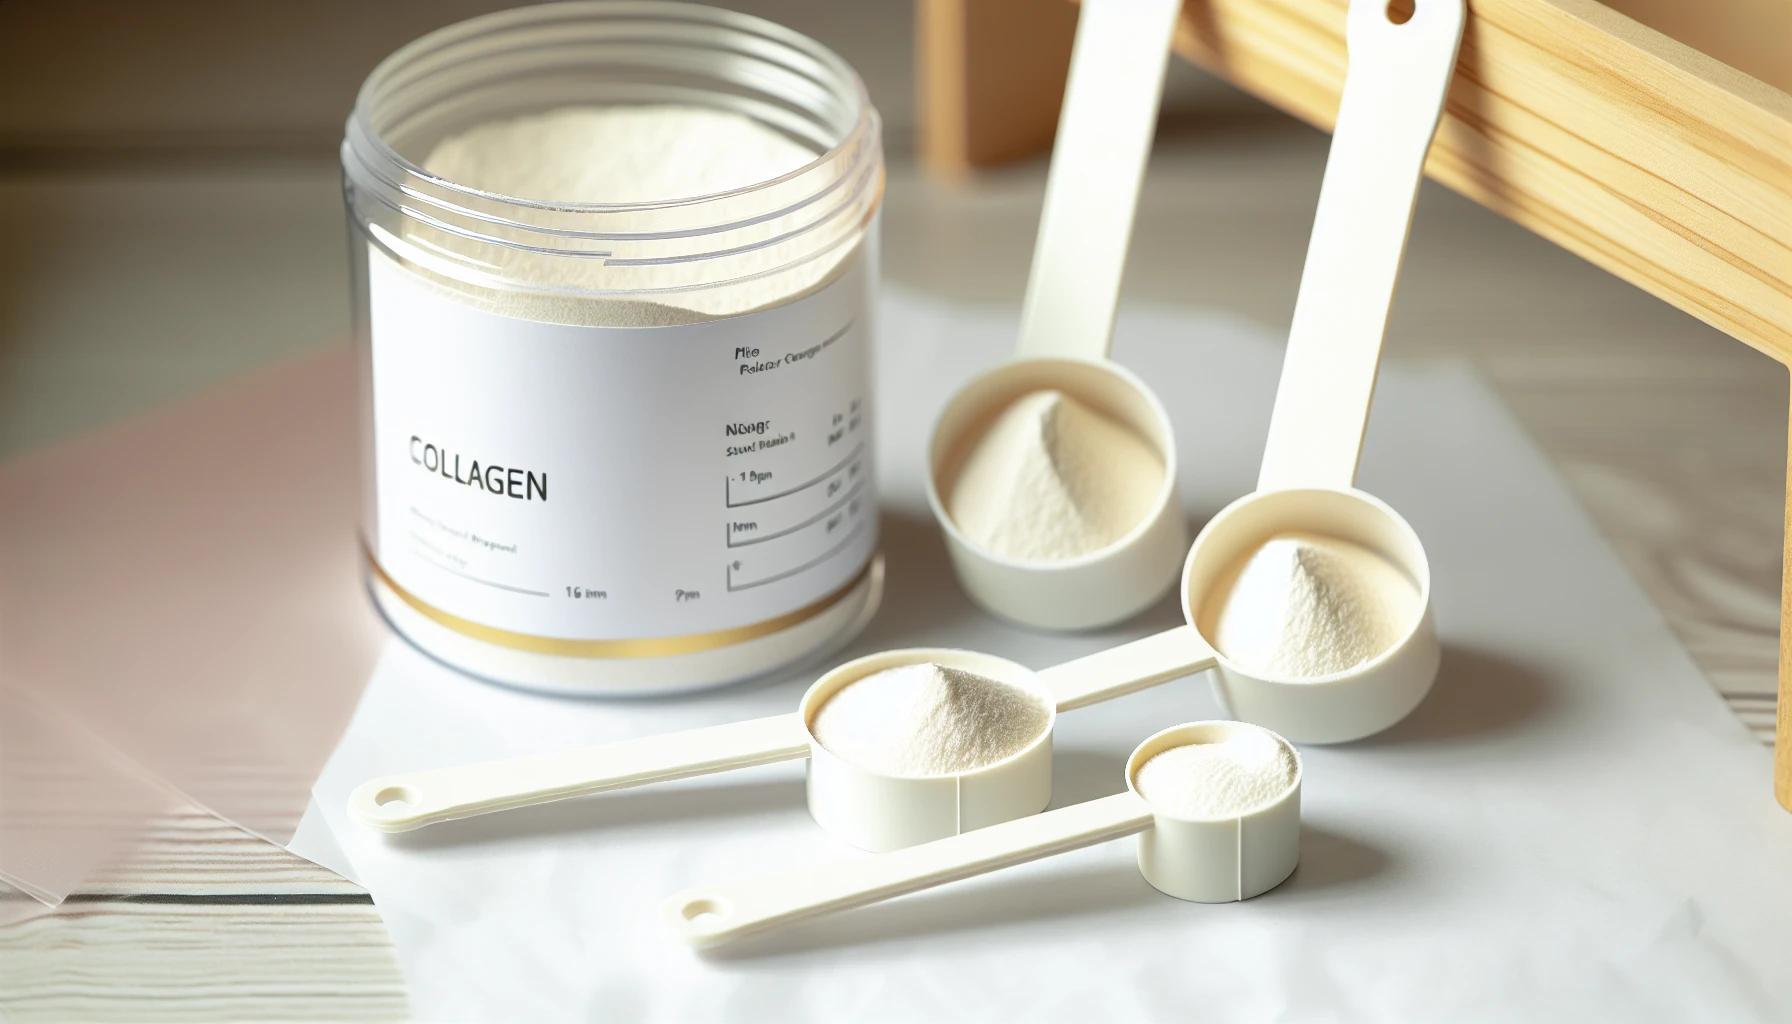 A photo of collagen supplements in powder form with measuring scoops